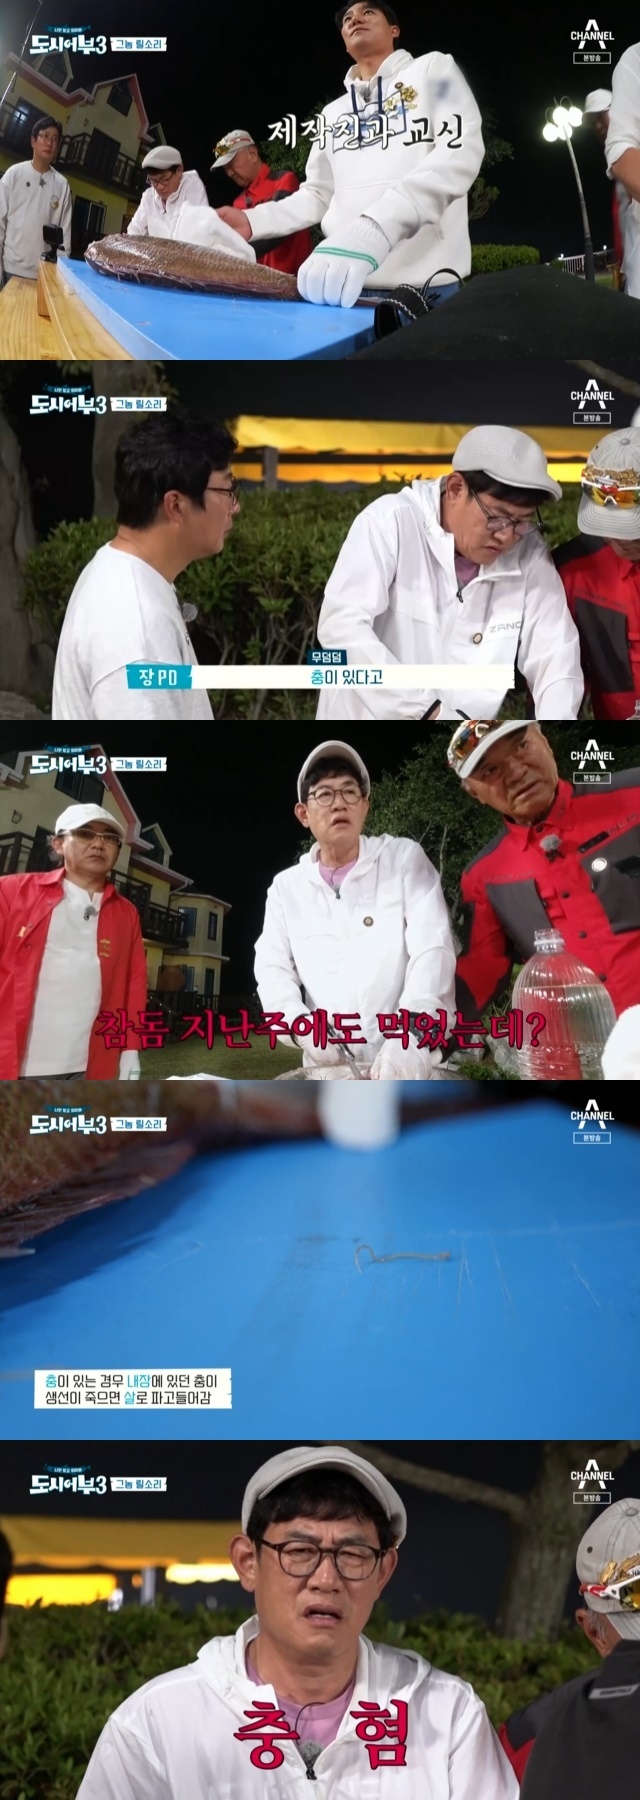 Lee Tae-gon was appalled to see the parasite while grooming the seventh Pagrus major.In the 11th episode of Channel A entertainment Follow Me Only, and City Fisherman Season 3 (hereinafter referred to as City Fisherman 3) broadcast on July 22, a fishing match against Pagrus major was held in the background of Taean Anmyeondo, Chungnam Province.At dinner time, Lee Tae-gon began to groom the 7th largest fish, Pagrus major, caught by Lee Duk-hwa.Meanwhile, Lee Tae-gon exchanged a few times with the production team with a short cry Oh My God.Theres a bug, Zhang PD told everyone of Lee Tae-gons intentions.Lee Kyung-gyu said, No, I ate last week. Lee Tae-gon said, I am in the interior and when the child dies, I dig into the flesh.I die in the heat, but I do not eat Pagrus major, Lee Tae-gon said. I have a lot of insects.